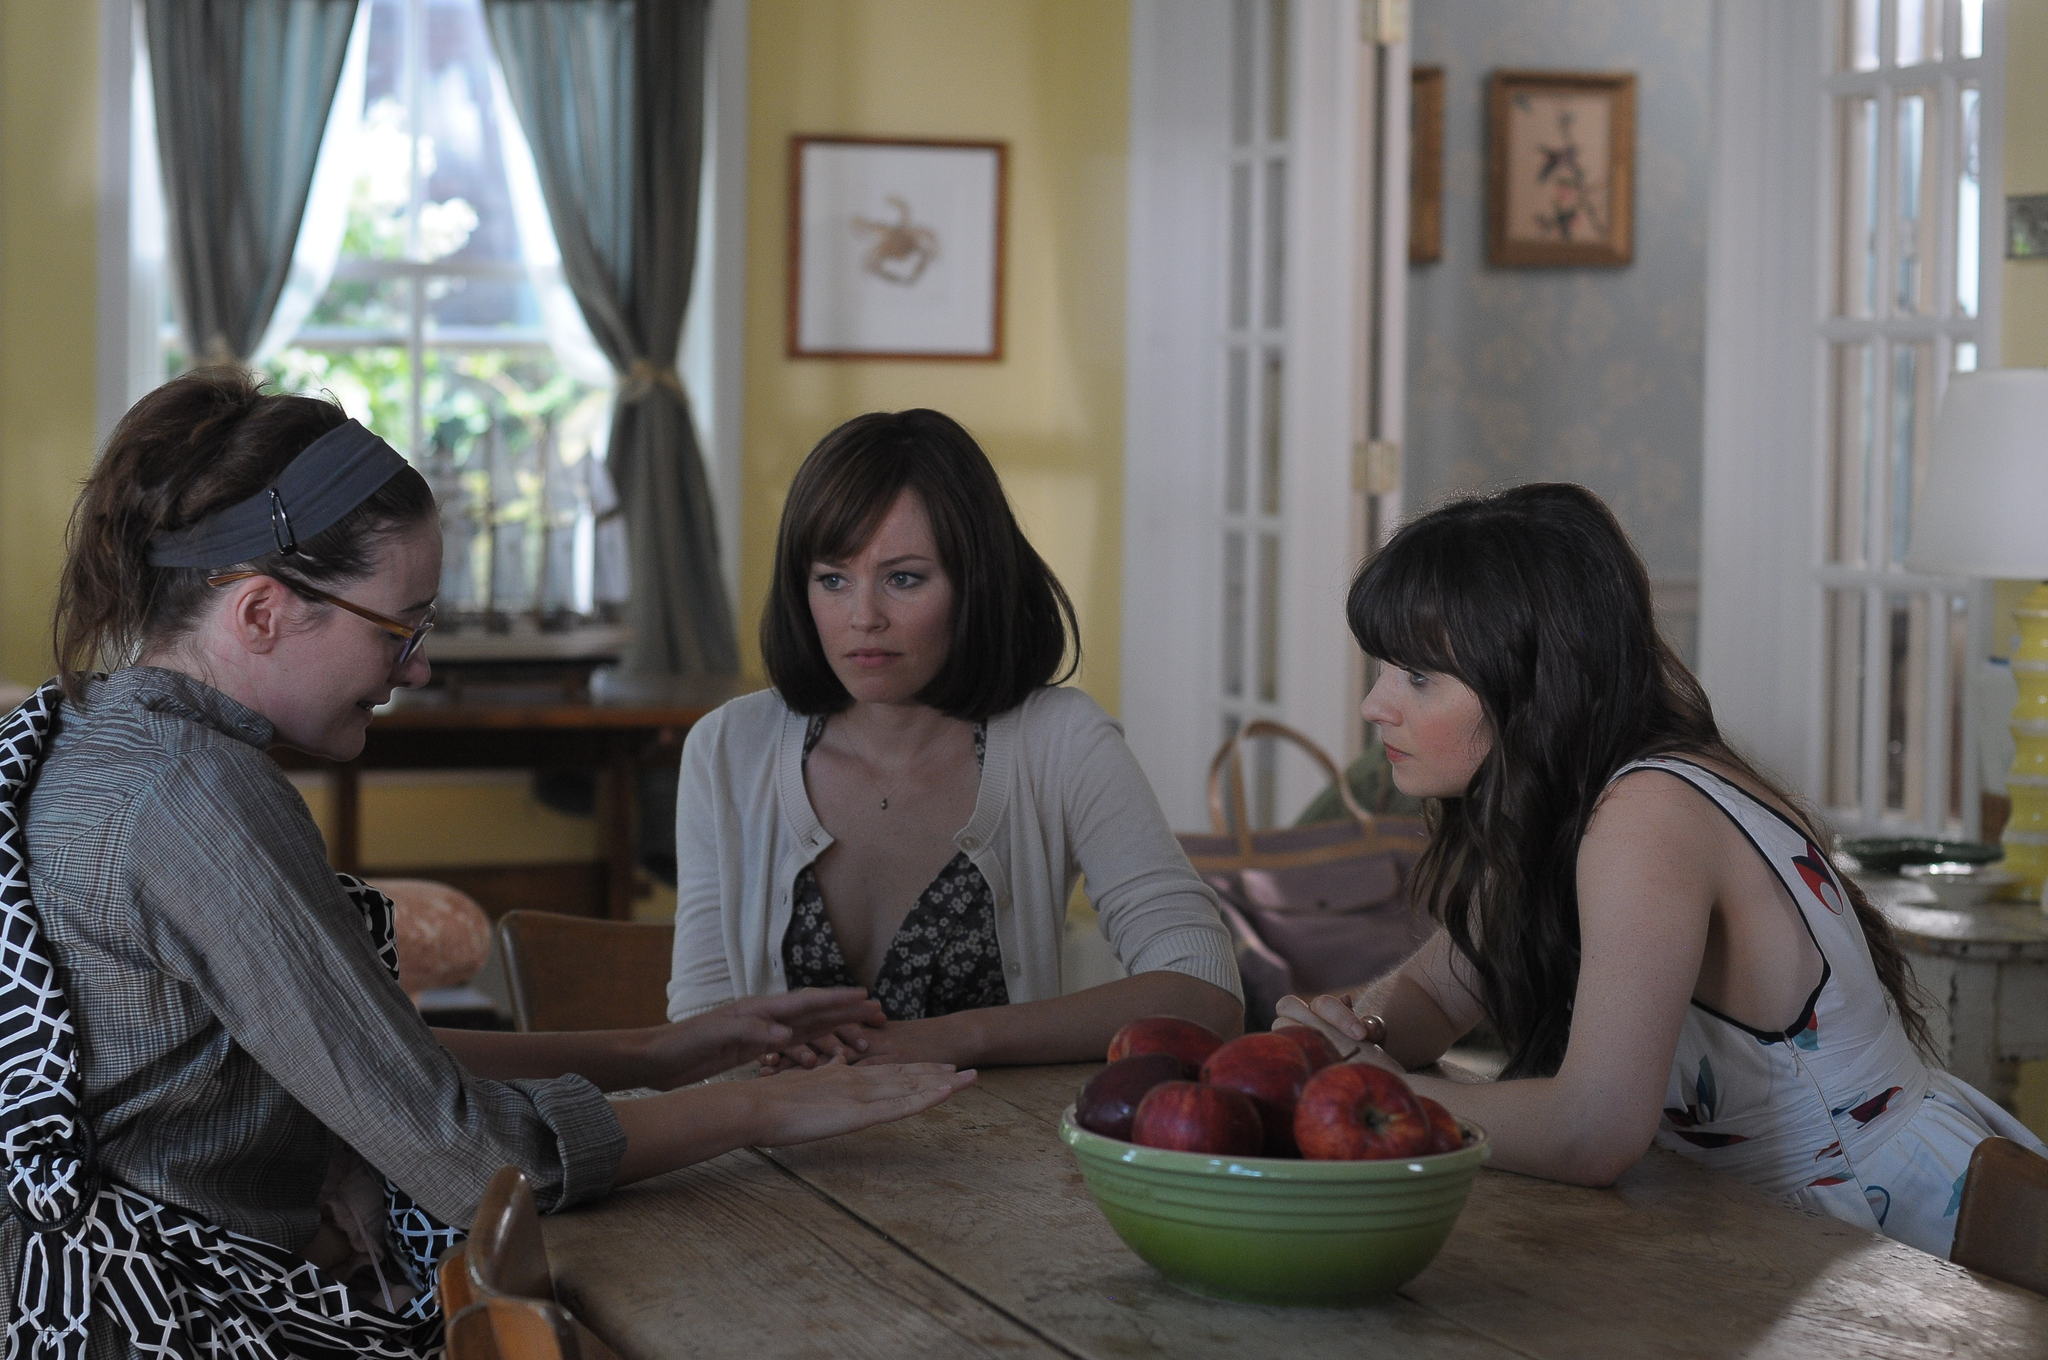 Still of Elizabeth Banks, Zooey Deschanel and Emily Mortimer in Our Idiot Brother (2011)